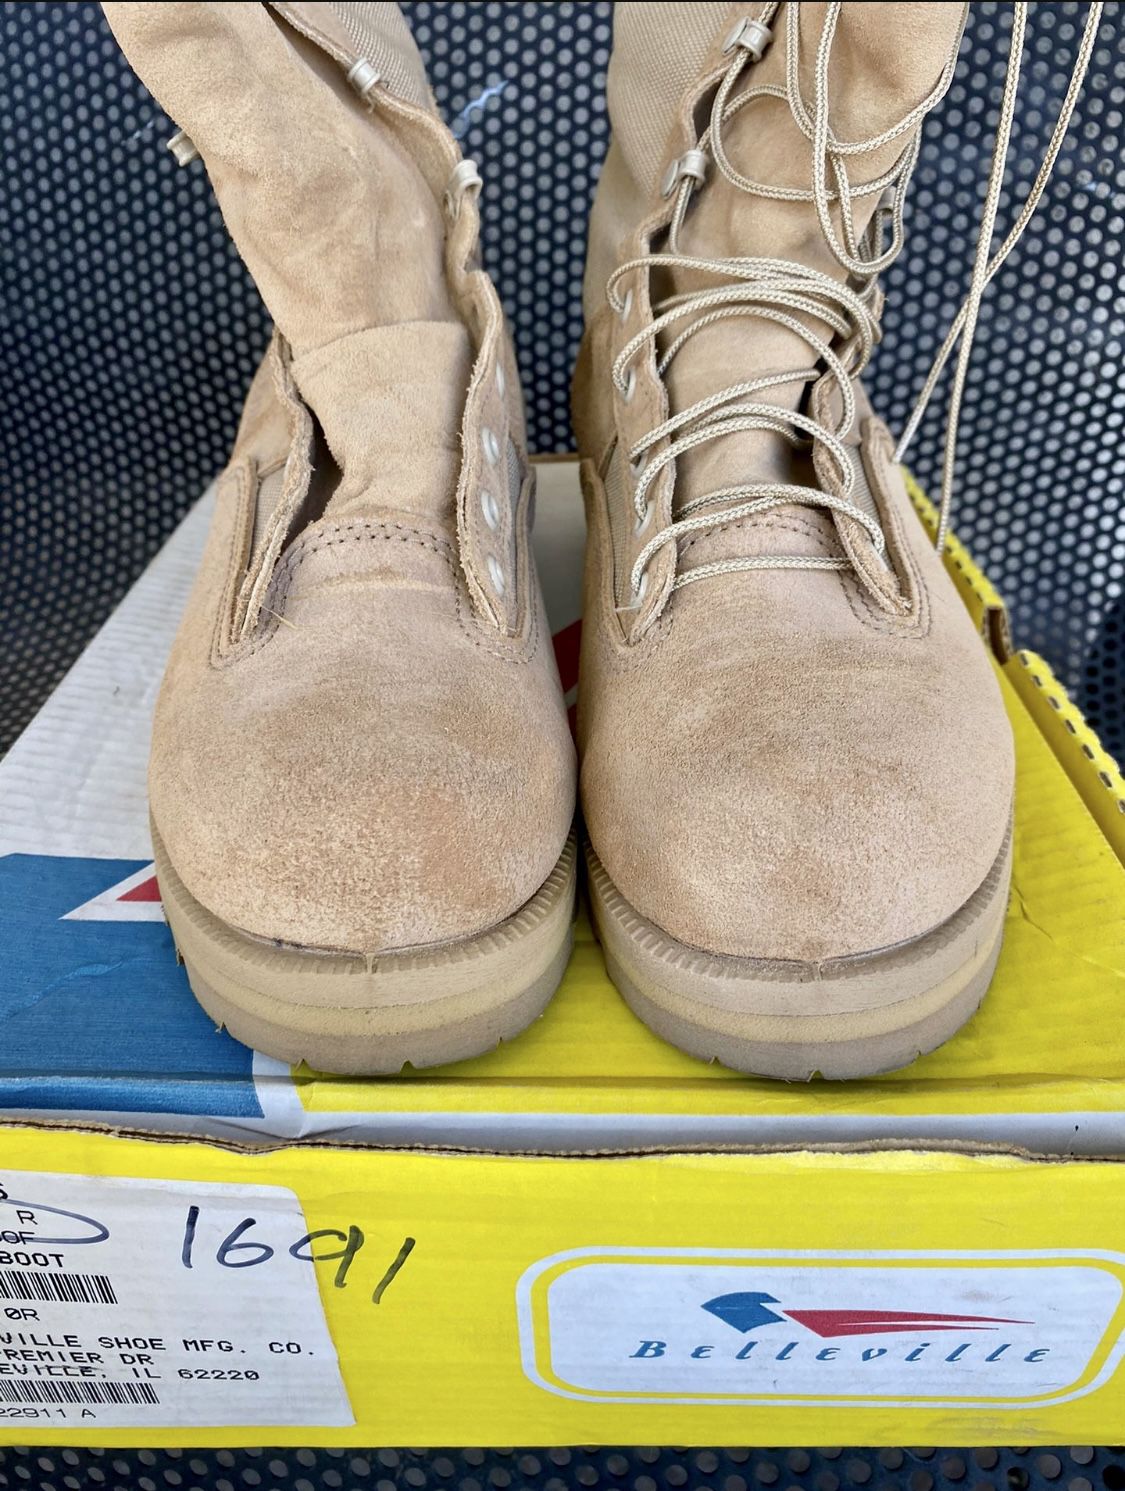 Belleville military boots size 11